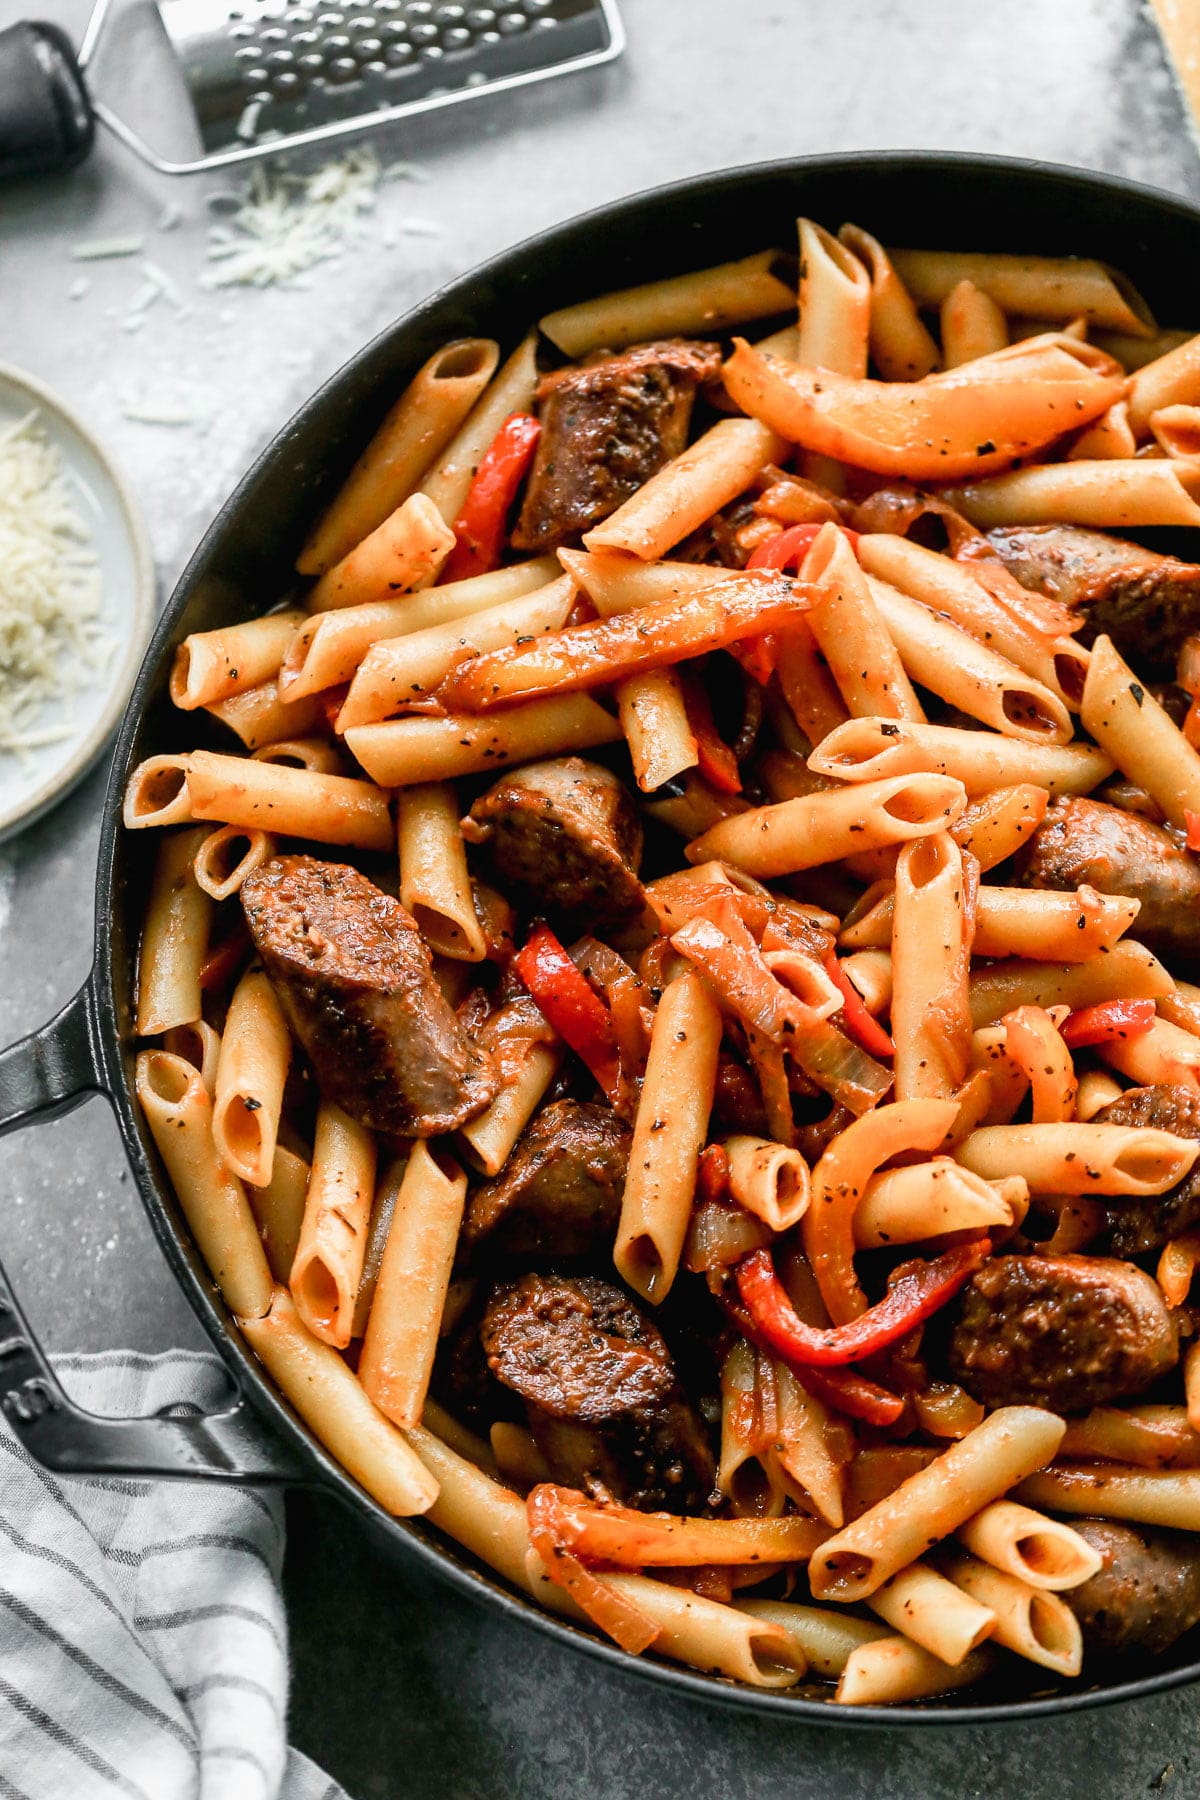 Rather simple and admittedly un-fancy, our Italian Sausage and Peppers Pasta doesn't have to be the most sophisticated gal on the block because what it IS, is delicious, quick-cooking and made with easy-to-find inexpensive  ingredients.